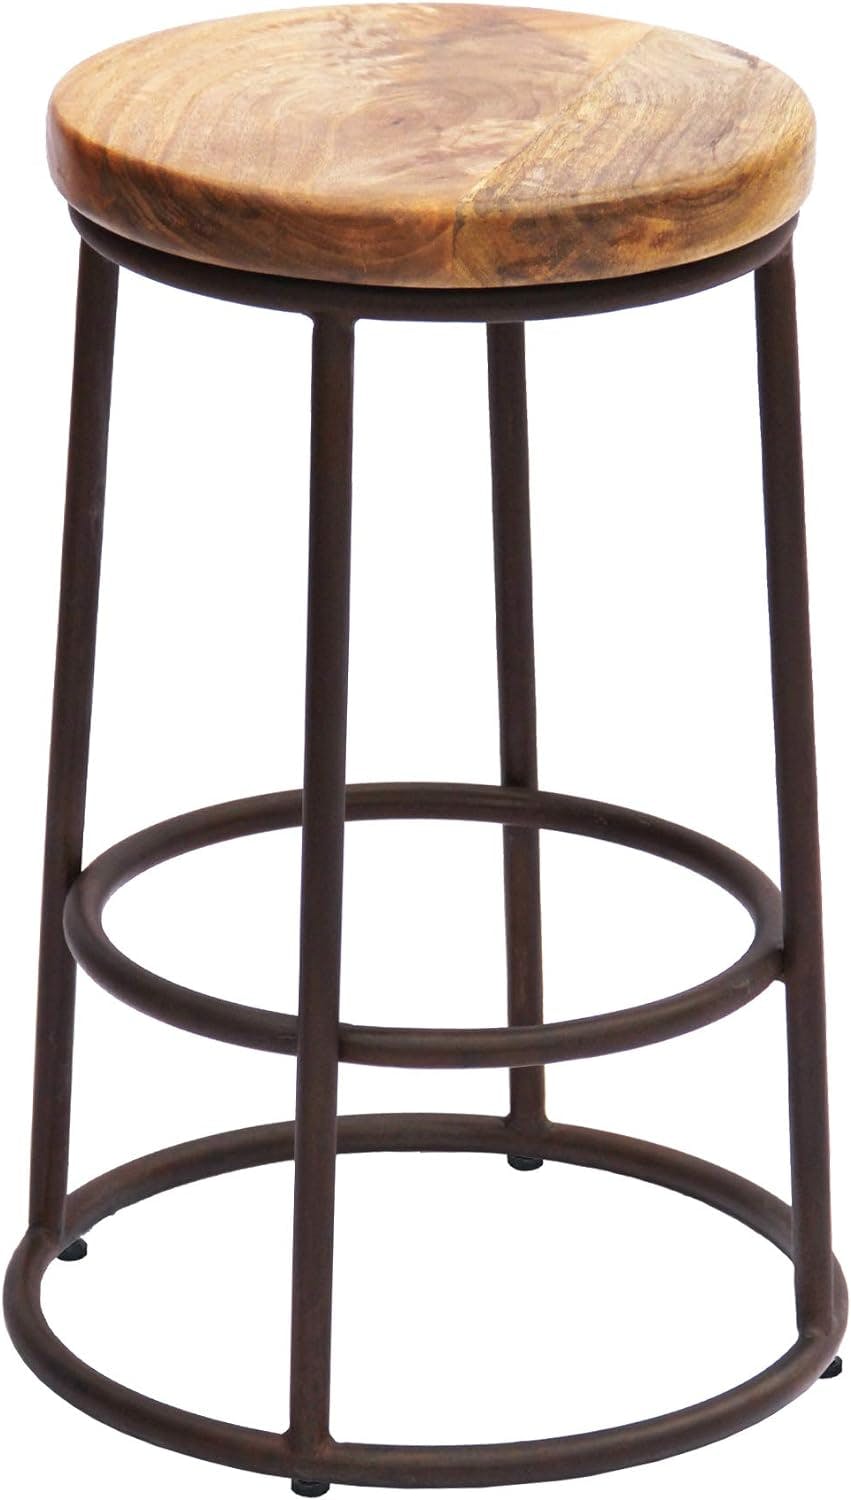 Circular Mango Wood and Iron 24'' Counter Stool in Brown and Black